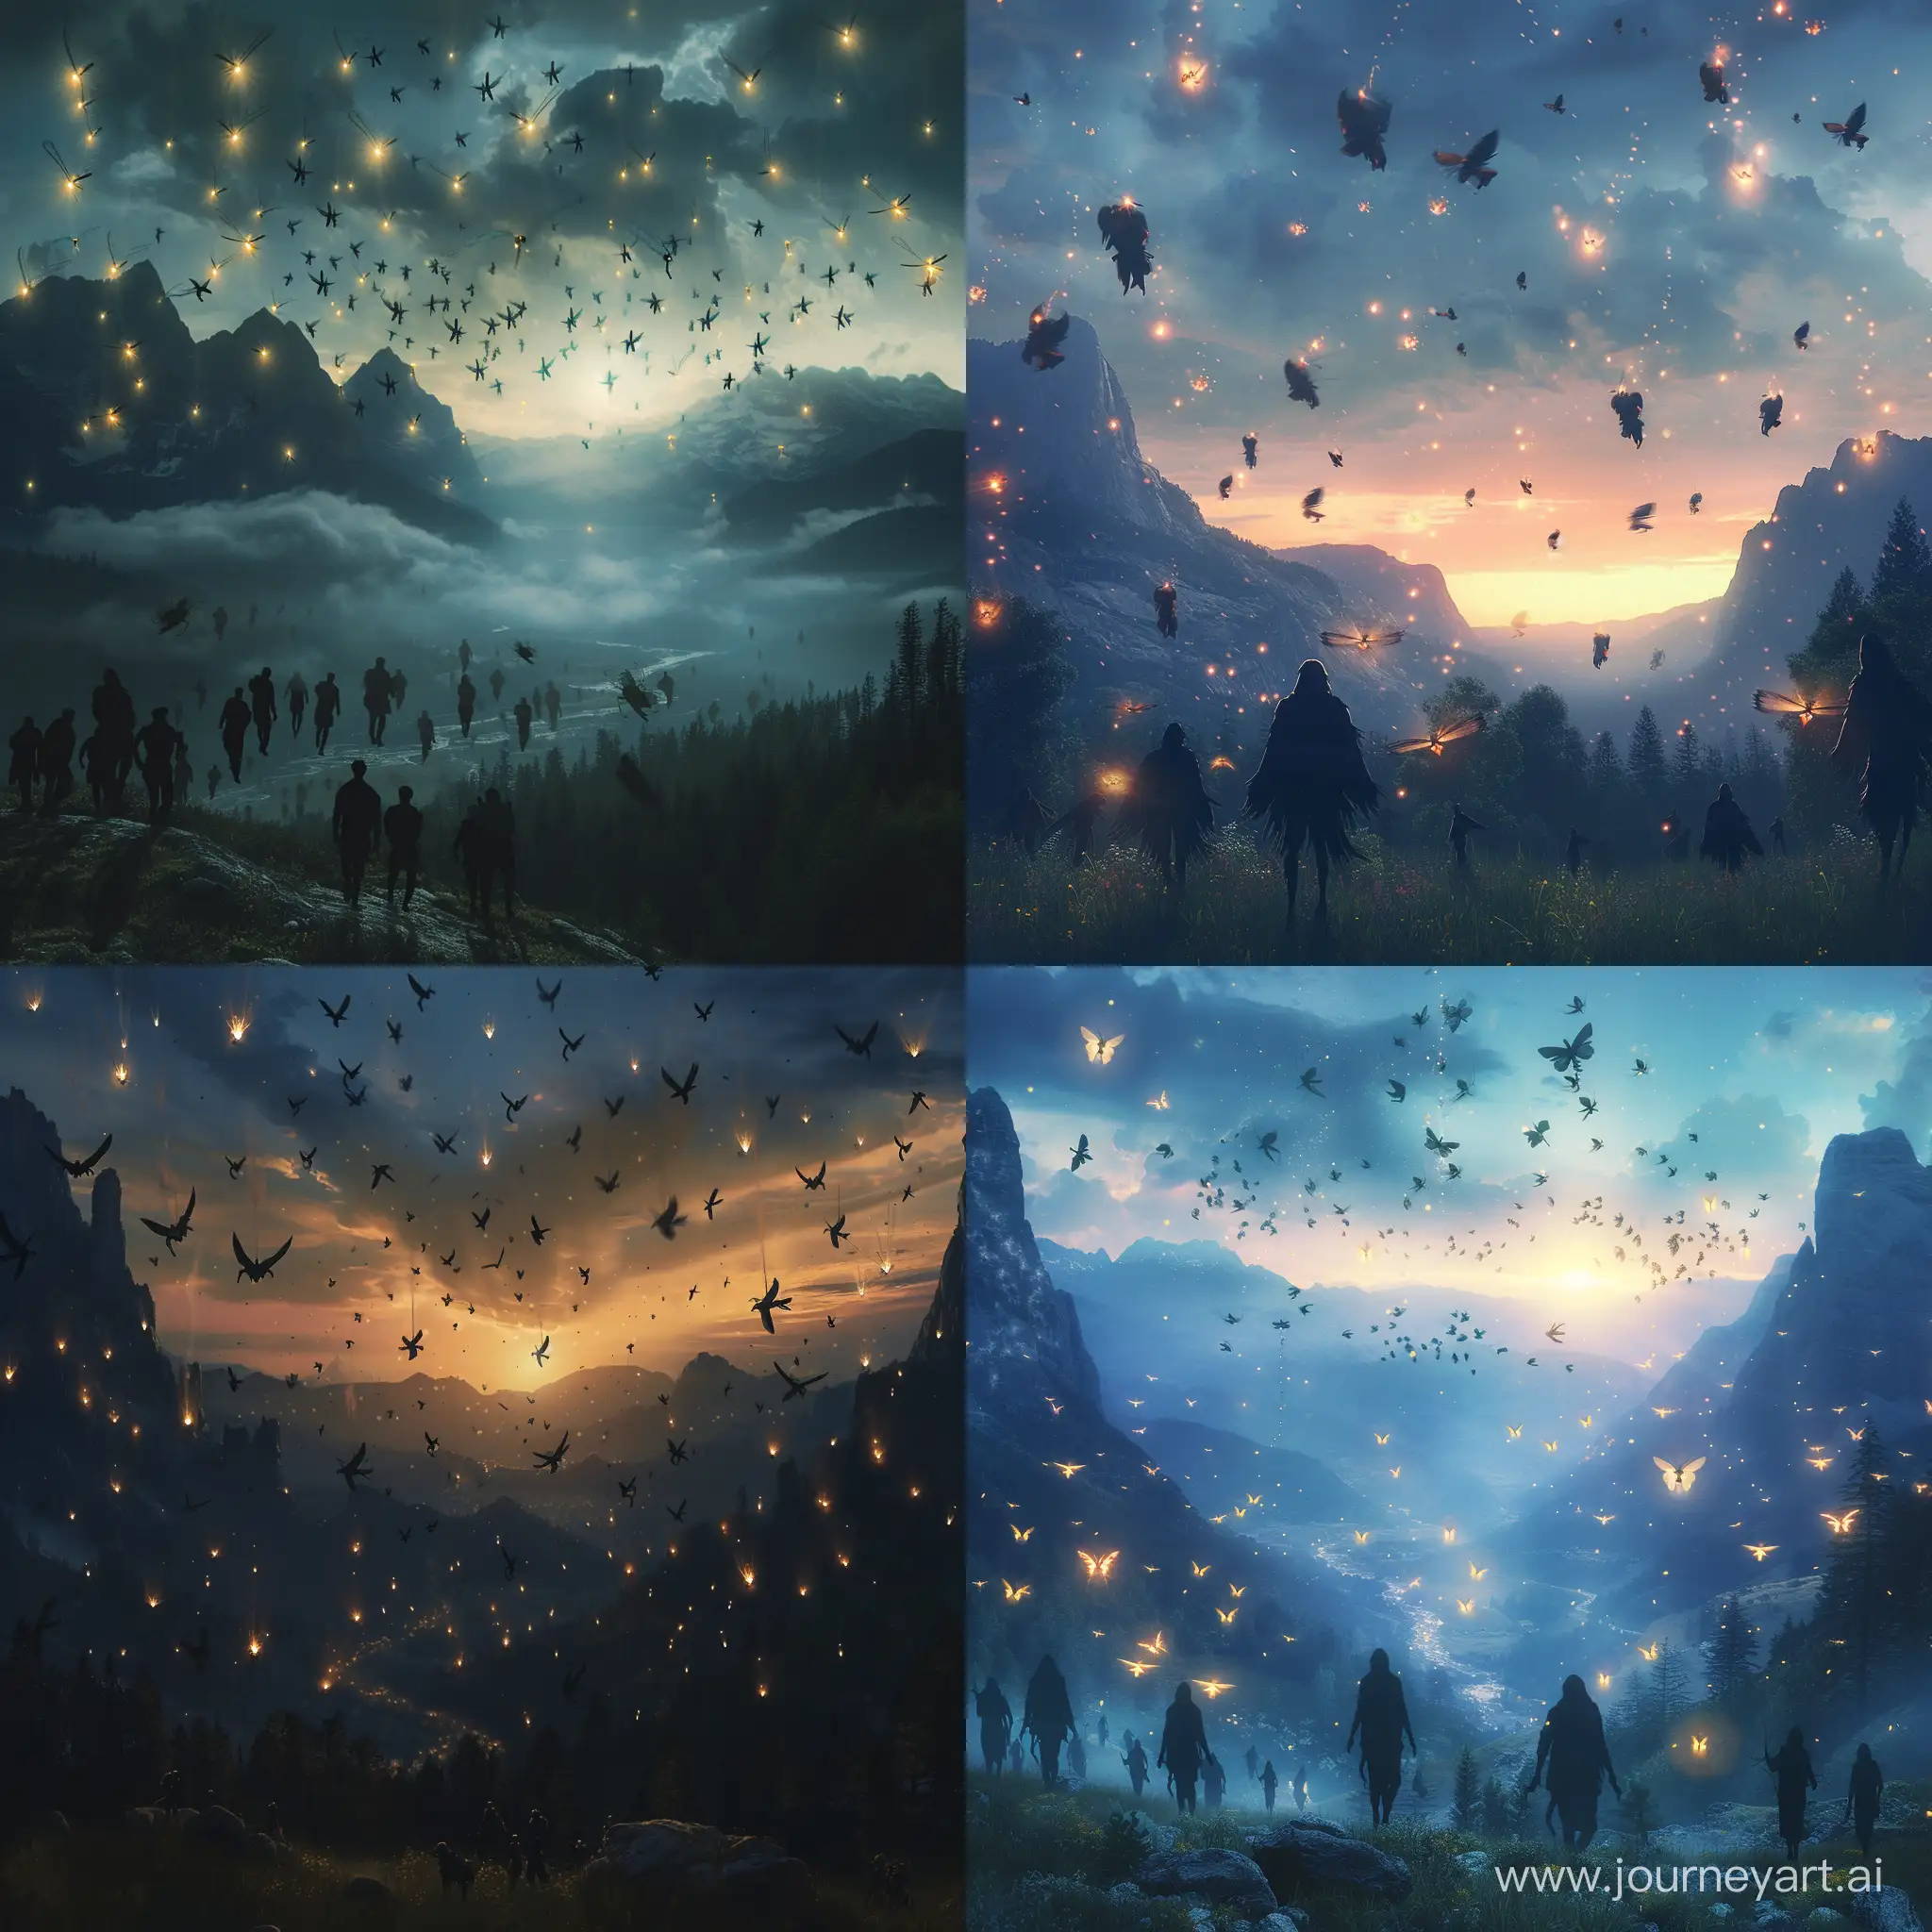 This picture shows a twilight landscape where the majestic sky is illuminated by the bright lights of Doomsday. People, whose silhouettes have been turned into moths, slowly rise to the sky, like the smallest particles. They fly in all directions, surrounded by twinkling fireflies, symbolizing their departure into the unknown. Mountains and natural elements surround the scene, but they seem inaccessible and insurmountable, while people are fleeting and fragile in this majestic moment.